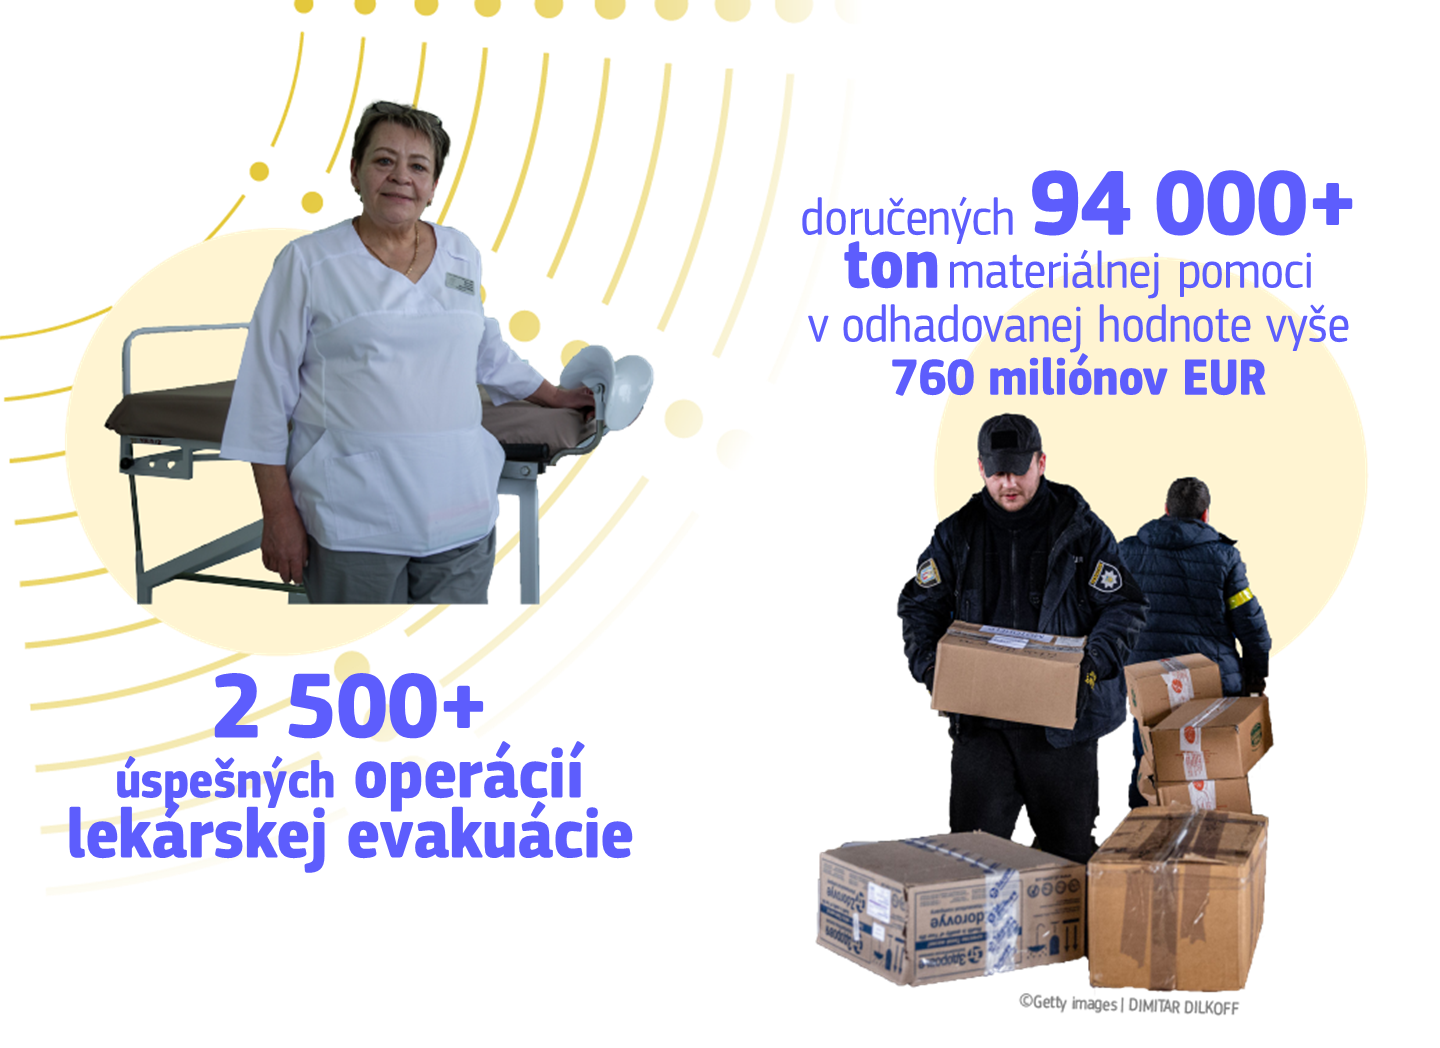 Infographic showing EU civil protection support to Ukraine